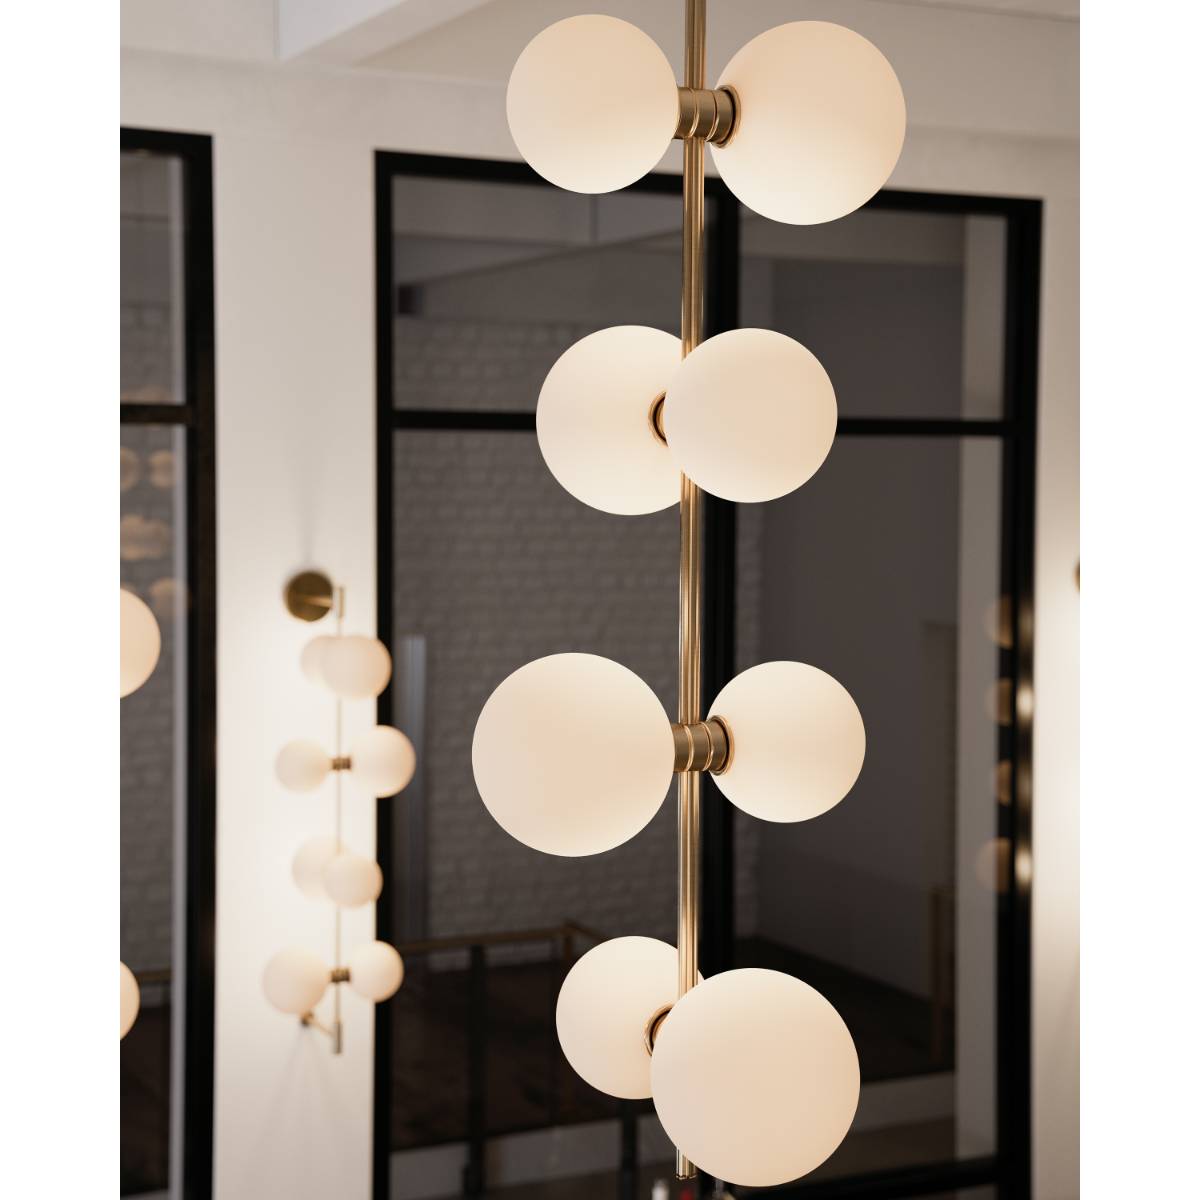 ModernRail 9 in. 8 Lights LED Pendant Light with Remote Conopy Brass Finish Glass Orbs